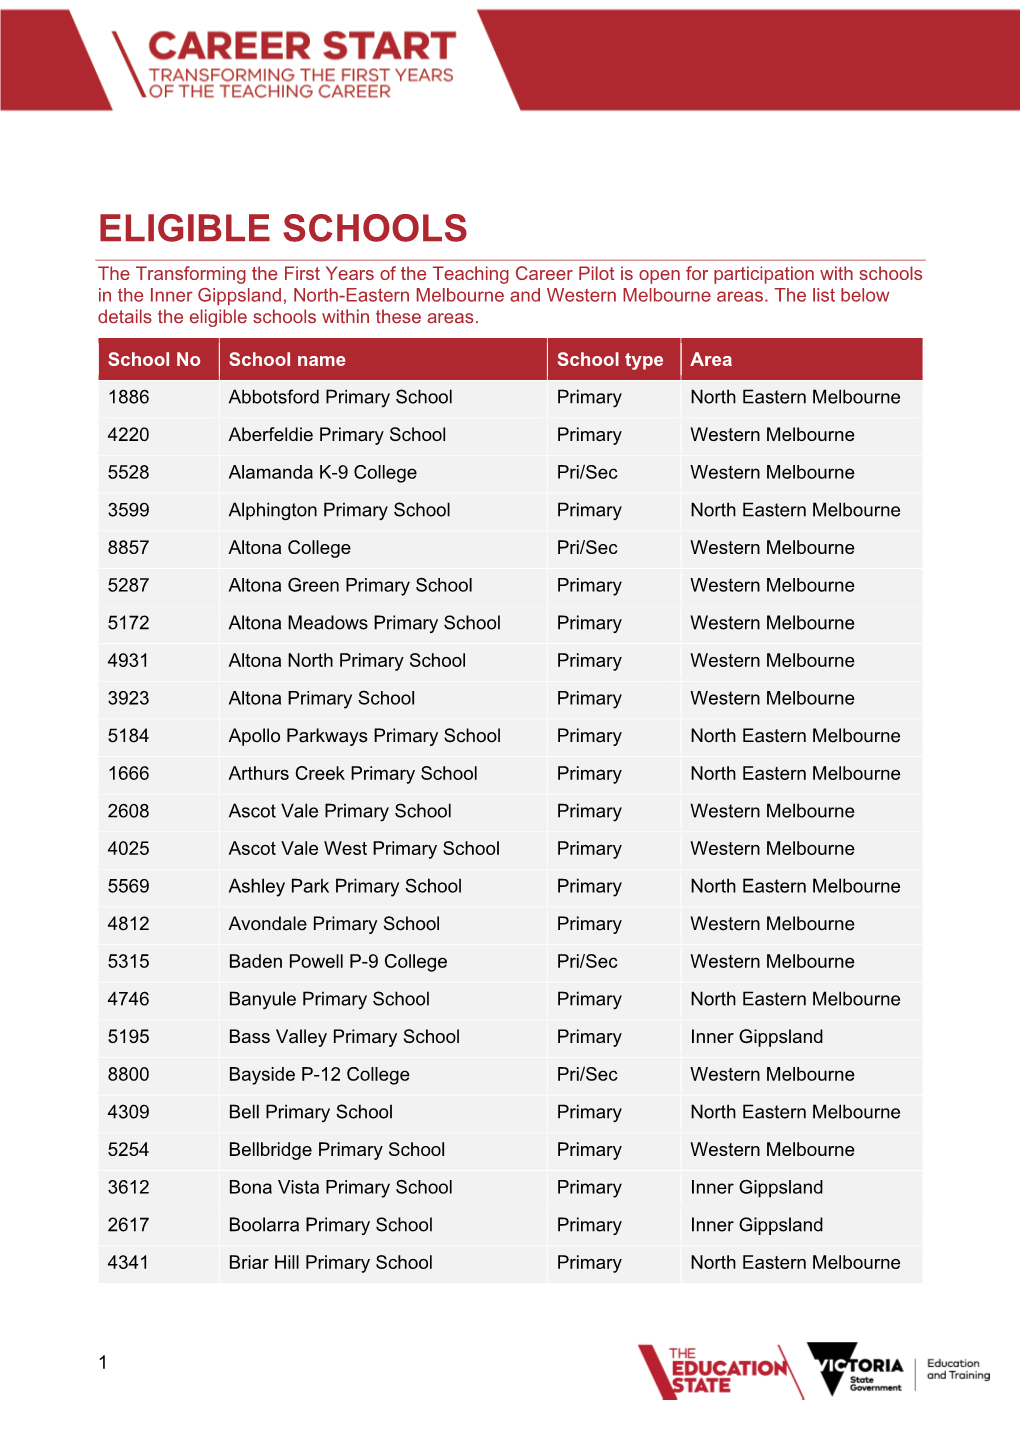 View the List of Eligible Schools